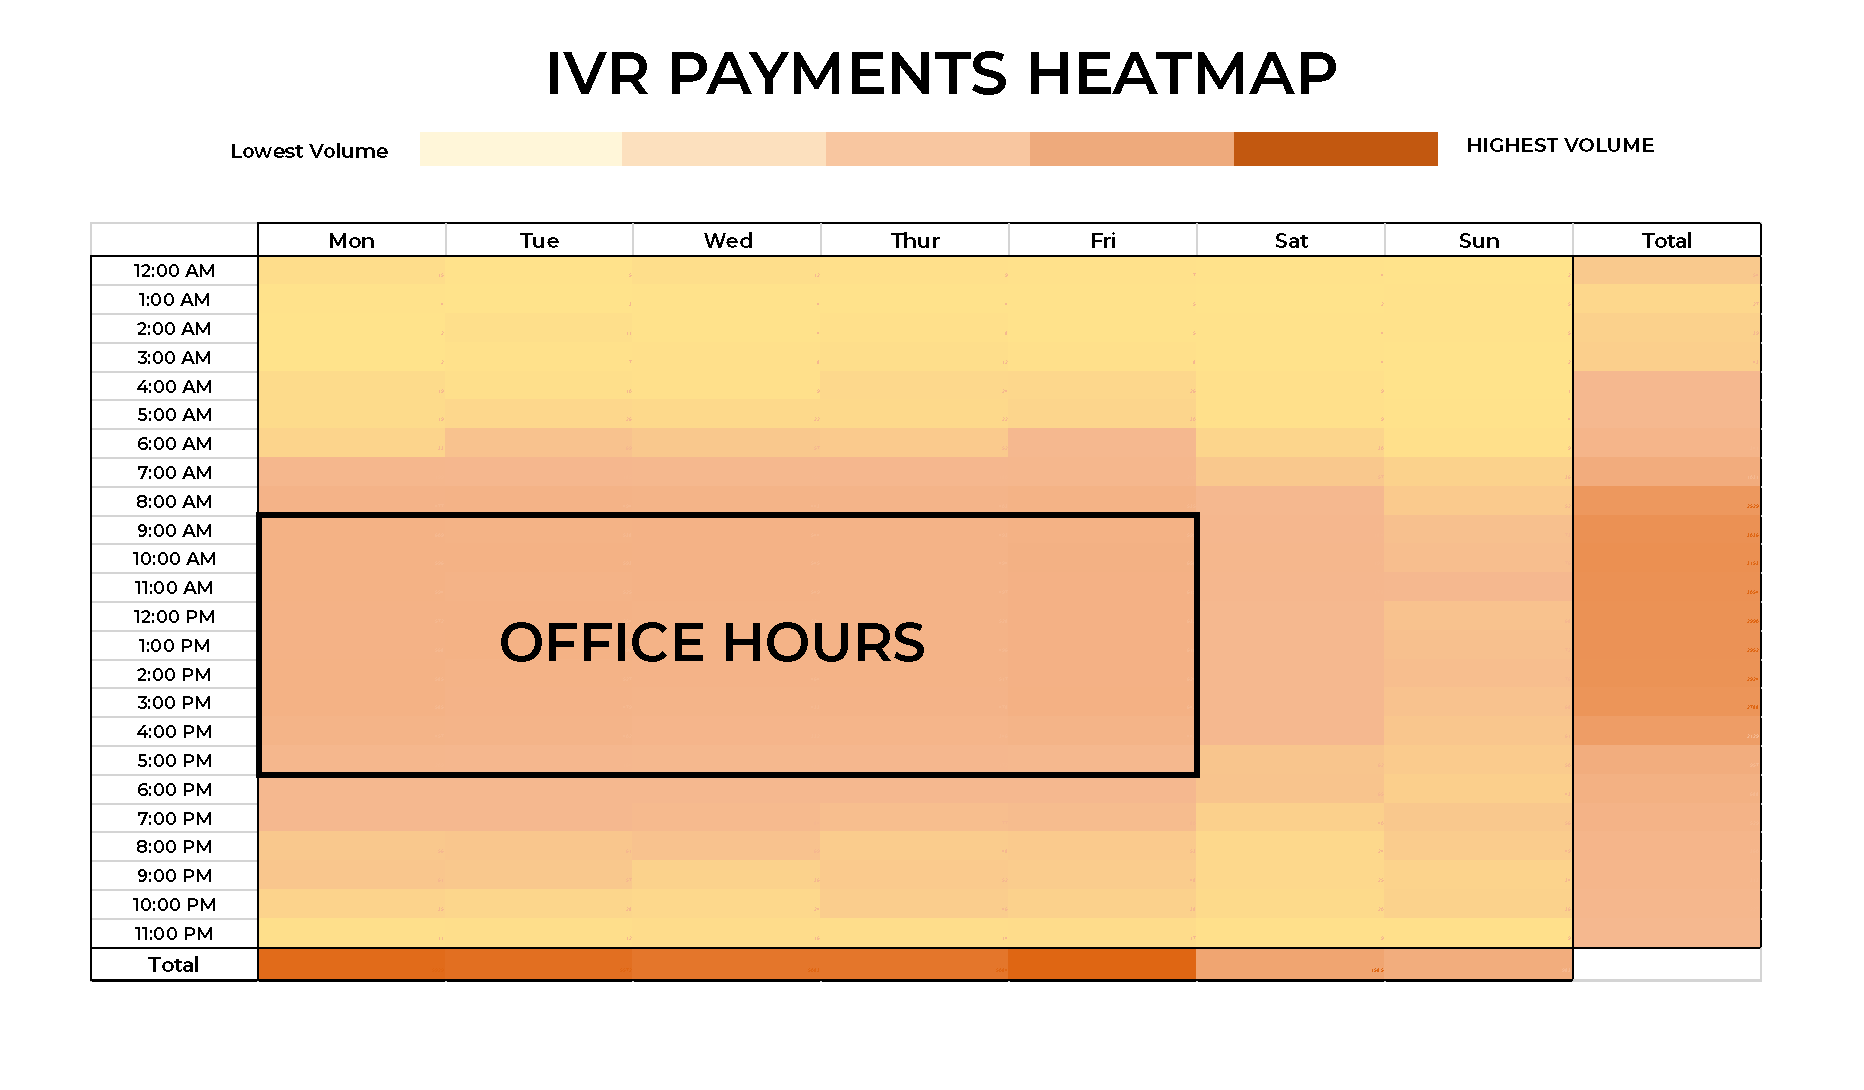 A heatmap of secure ivr payment processing through Intelligent Contacts' Payment IVR.